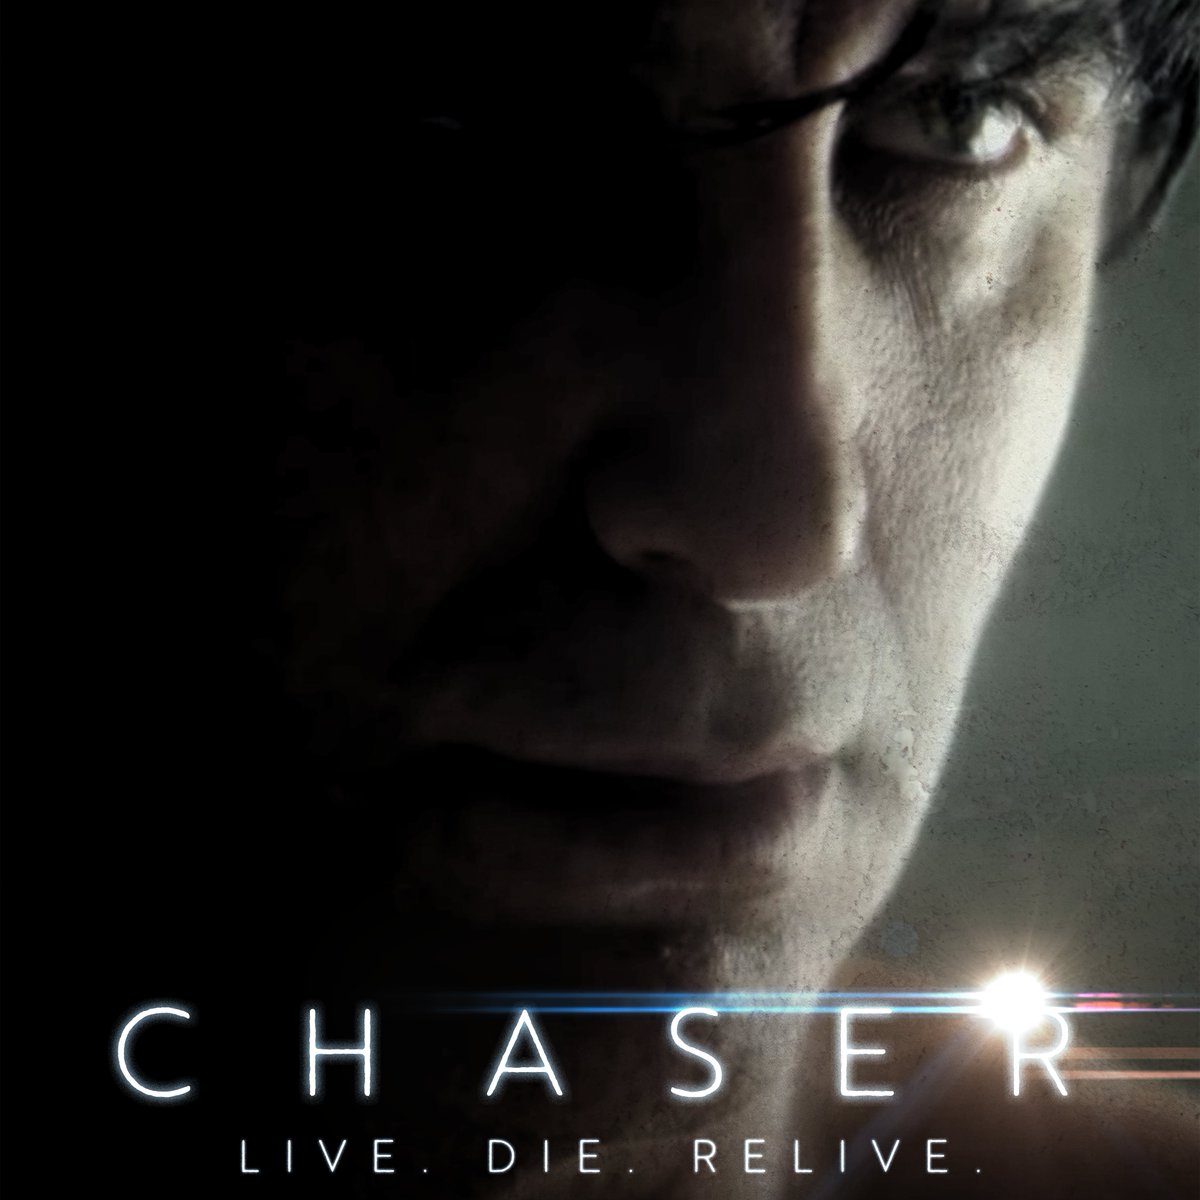 Zero Gravity’s Epic New Sci-Fi Series ‘Chaser’ Now On Prime Video With Distribution By Buffalo 8... movievine.com/news/zero-grav… @russrusso @movievine